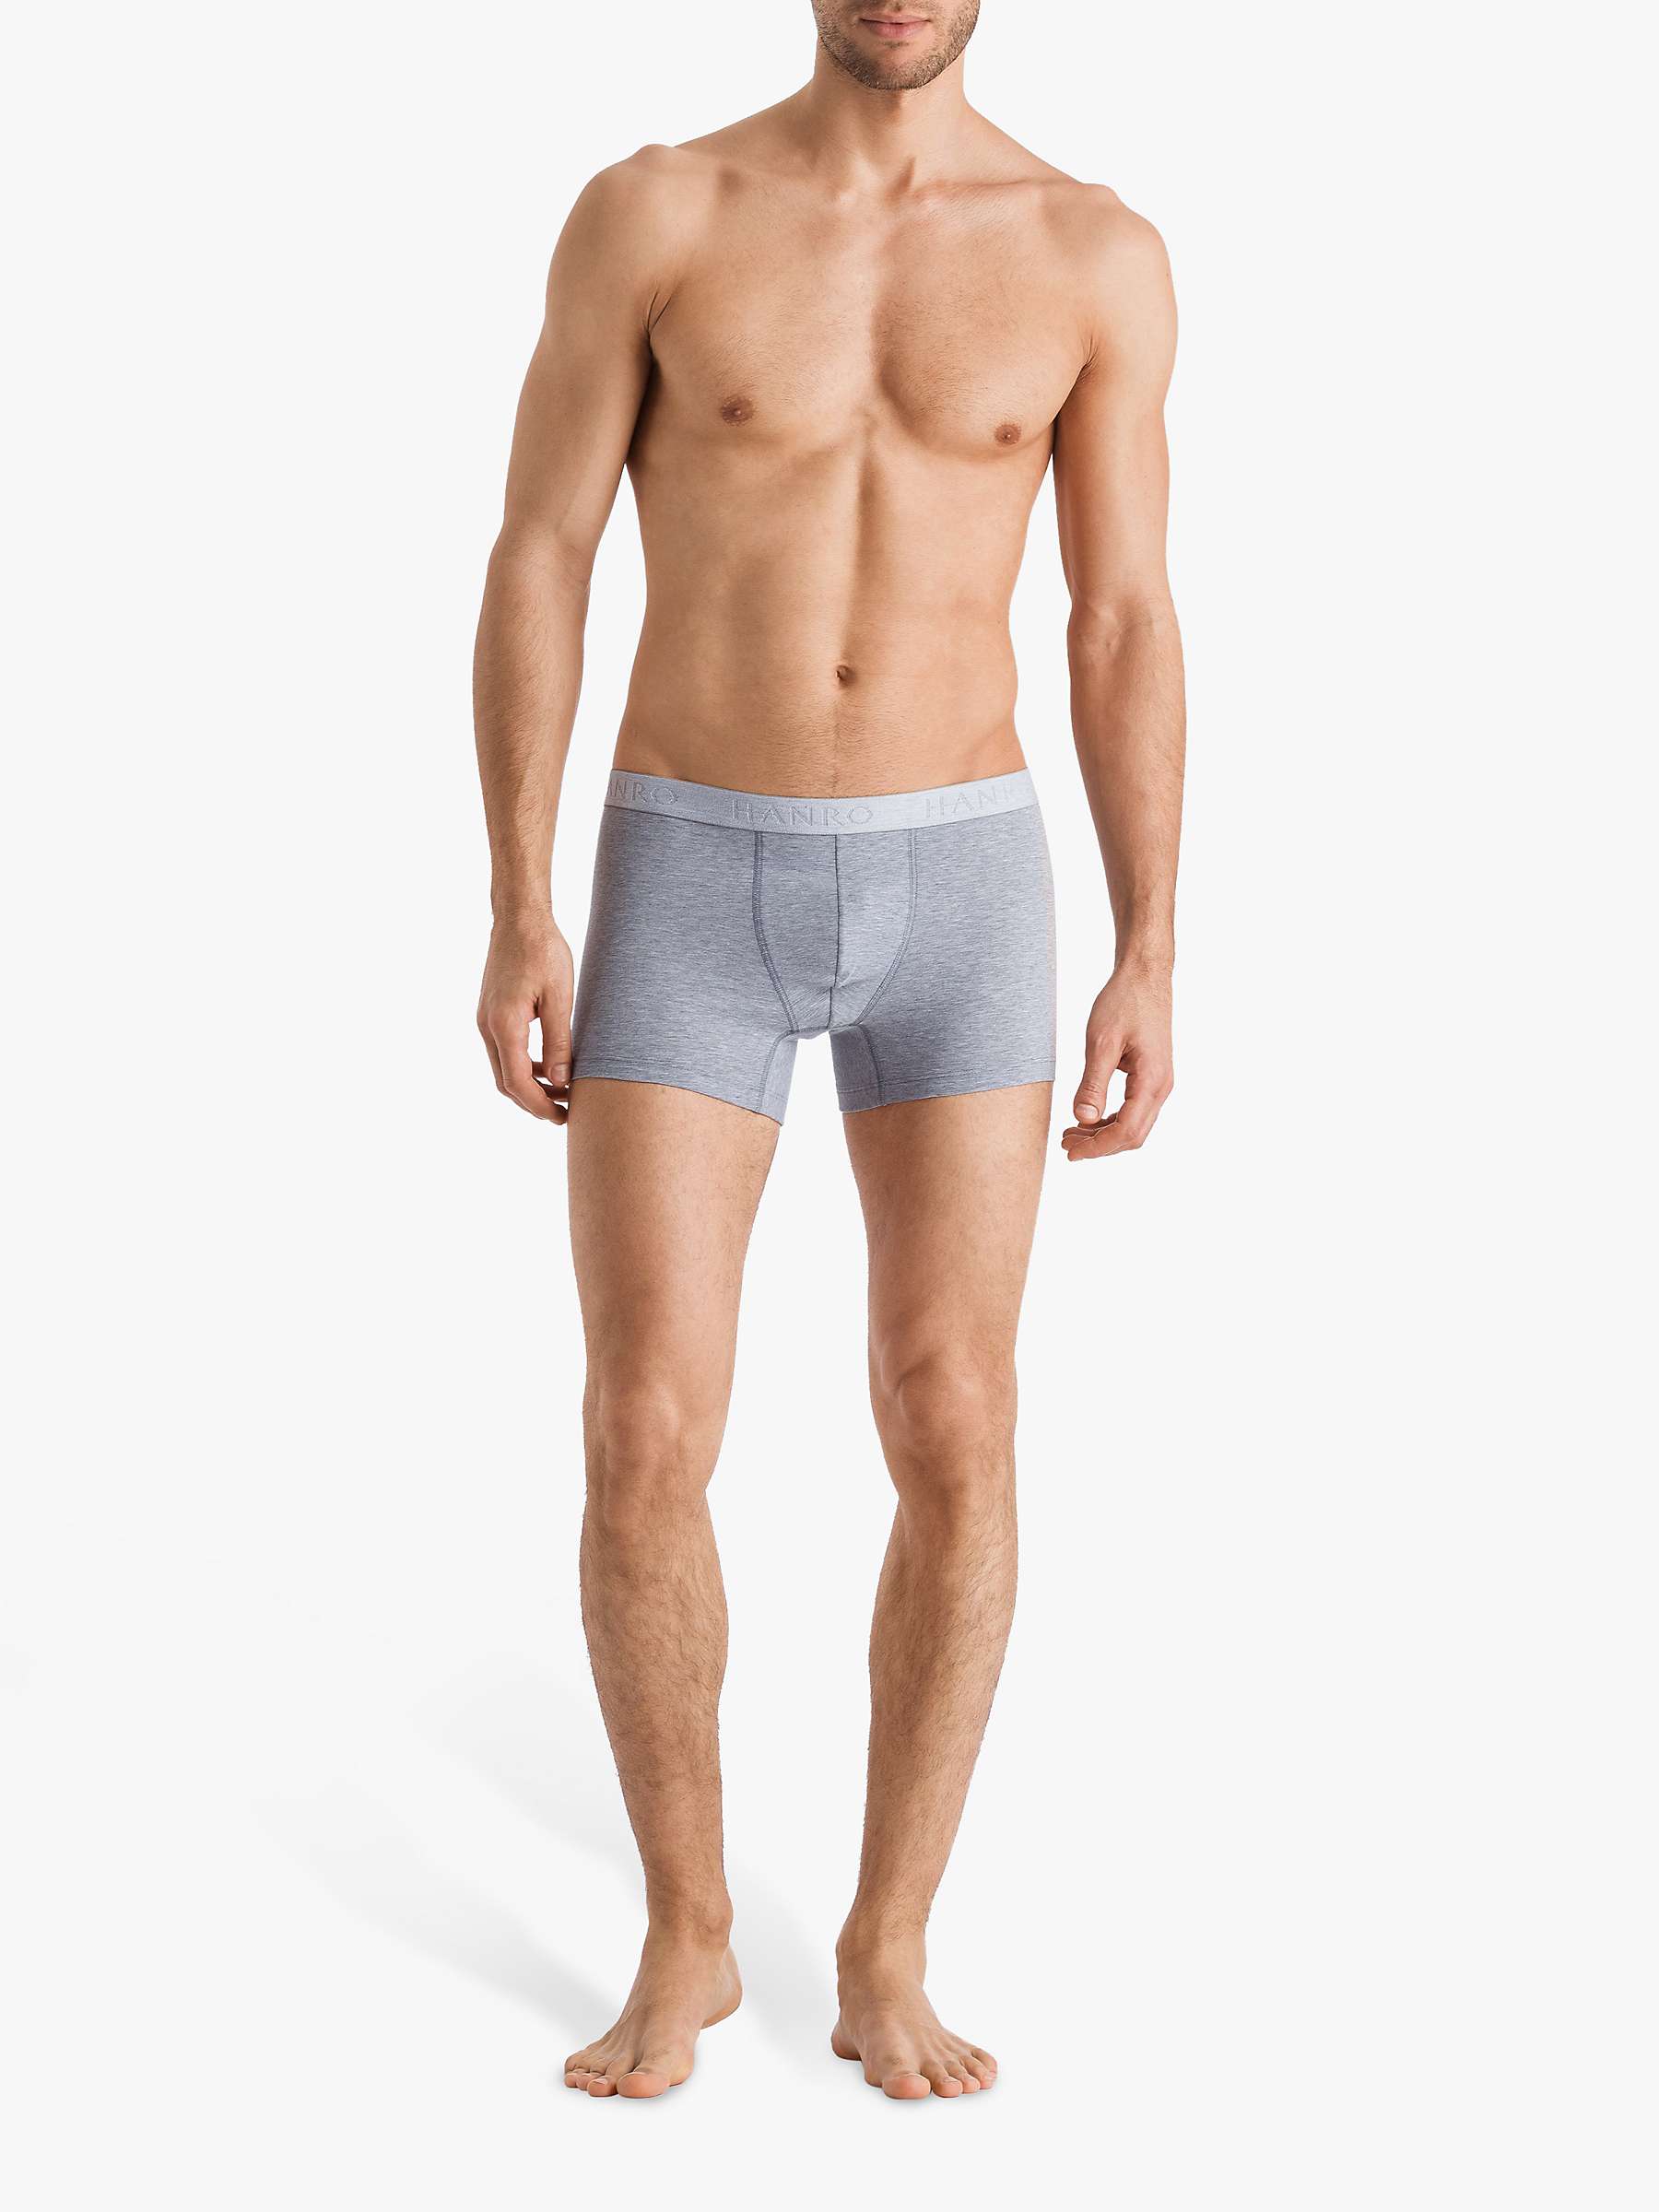 Buy Hanro Stretch Cotton Trunks, Pack of 2 Online at johnlewis.com